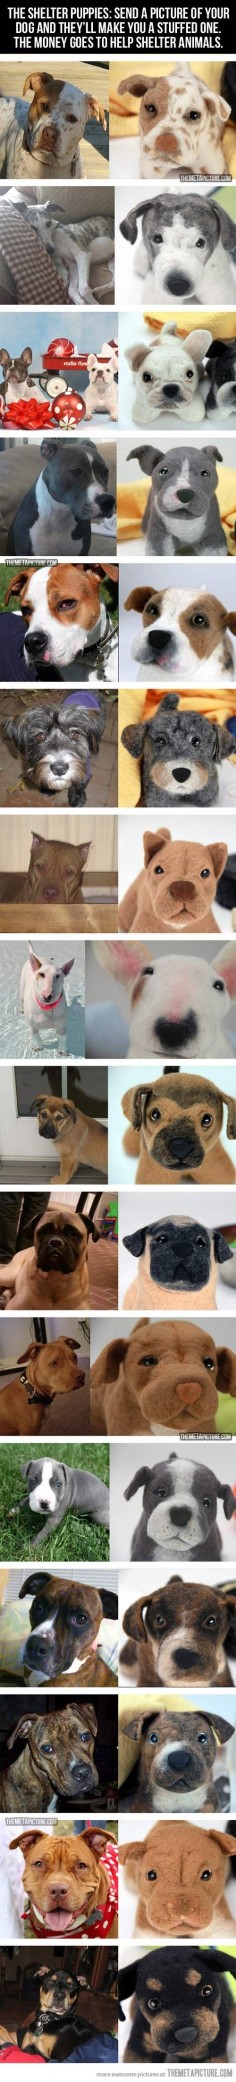 The Shelter Puppies: Send a picture of your dog and they'll make you a stuffed one. The money goes to help shelter animals!